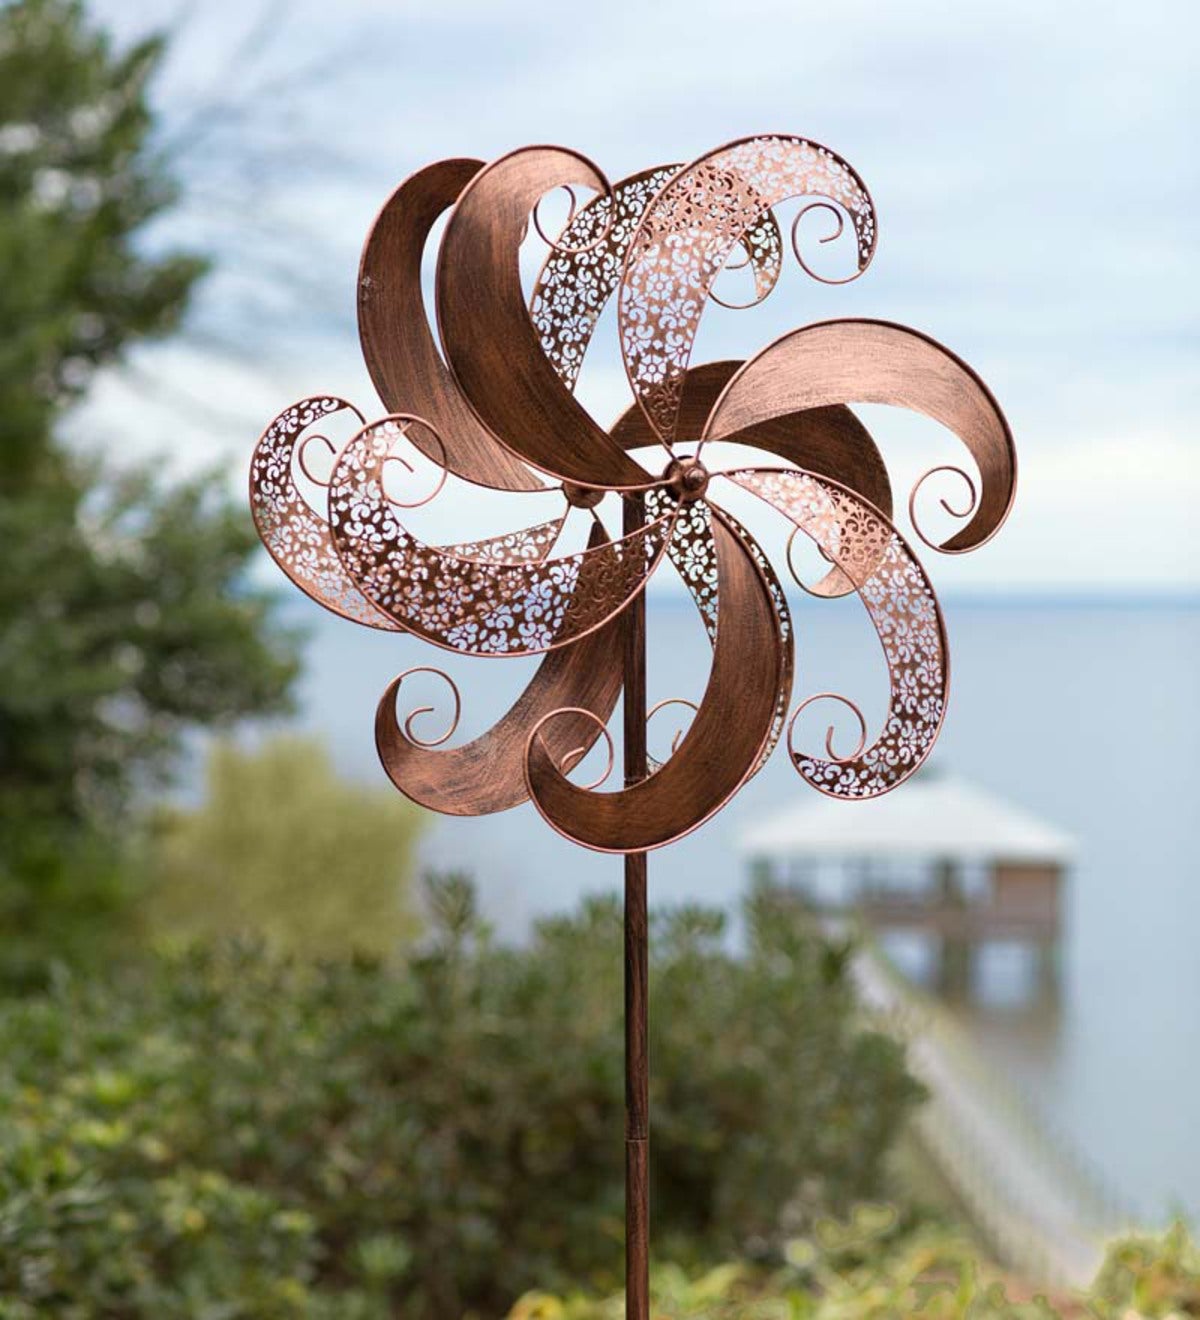 Copper-Colored Windmill Metal Spinner